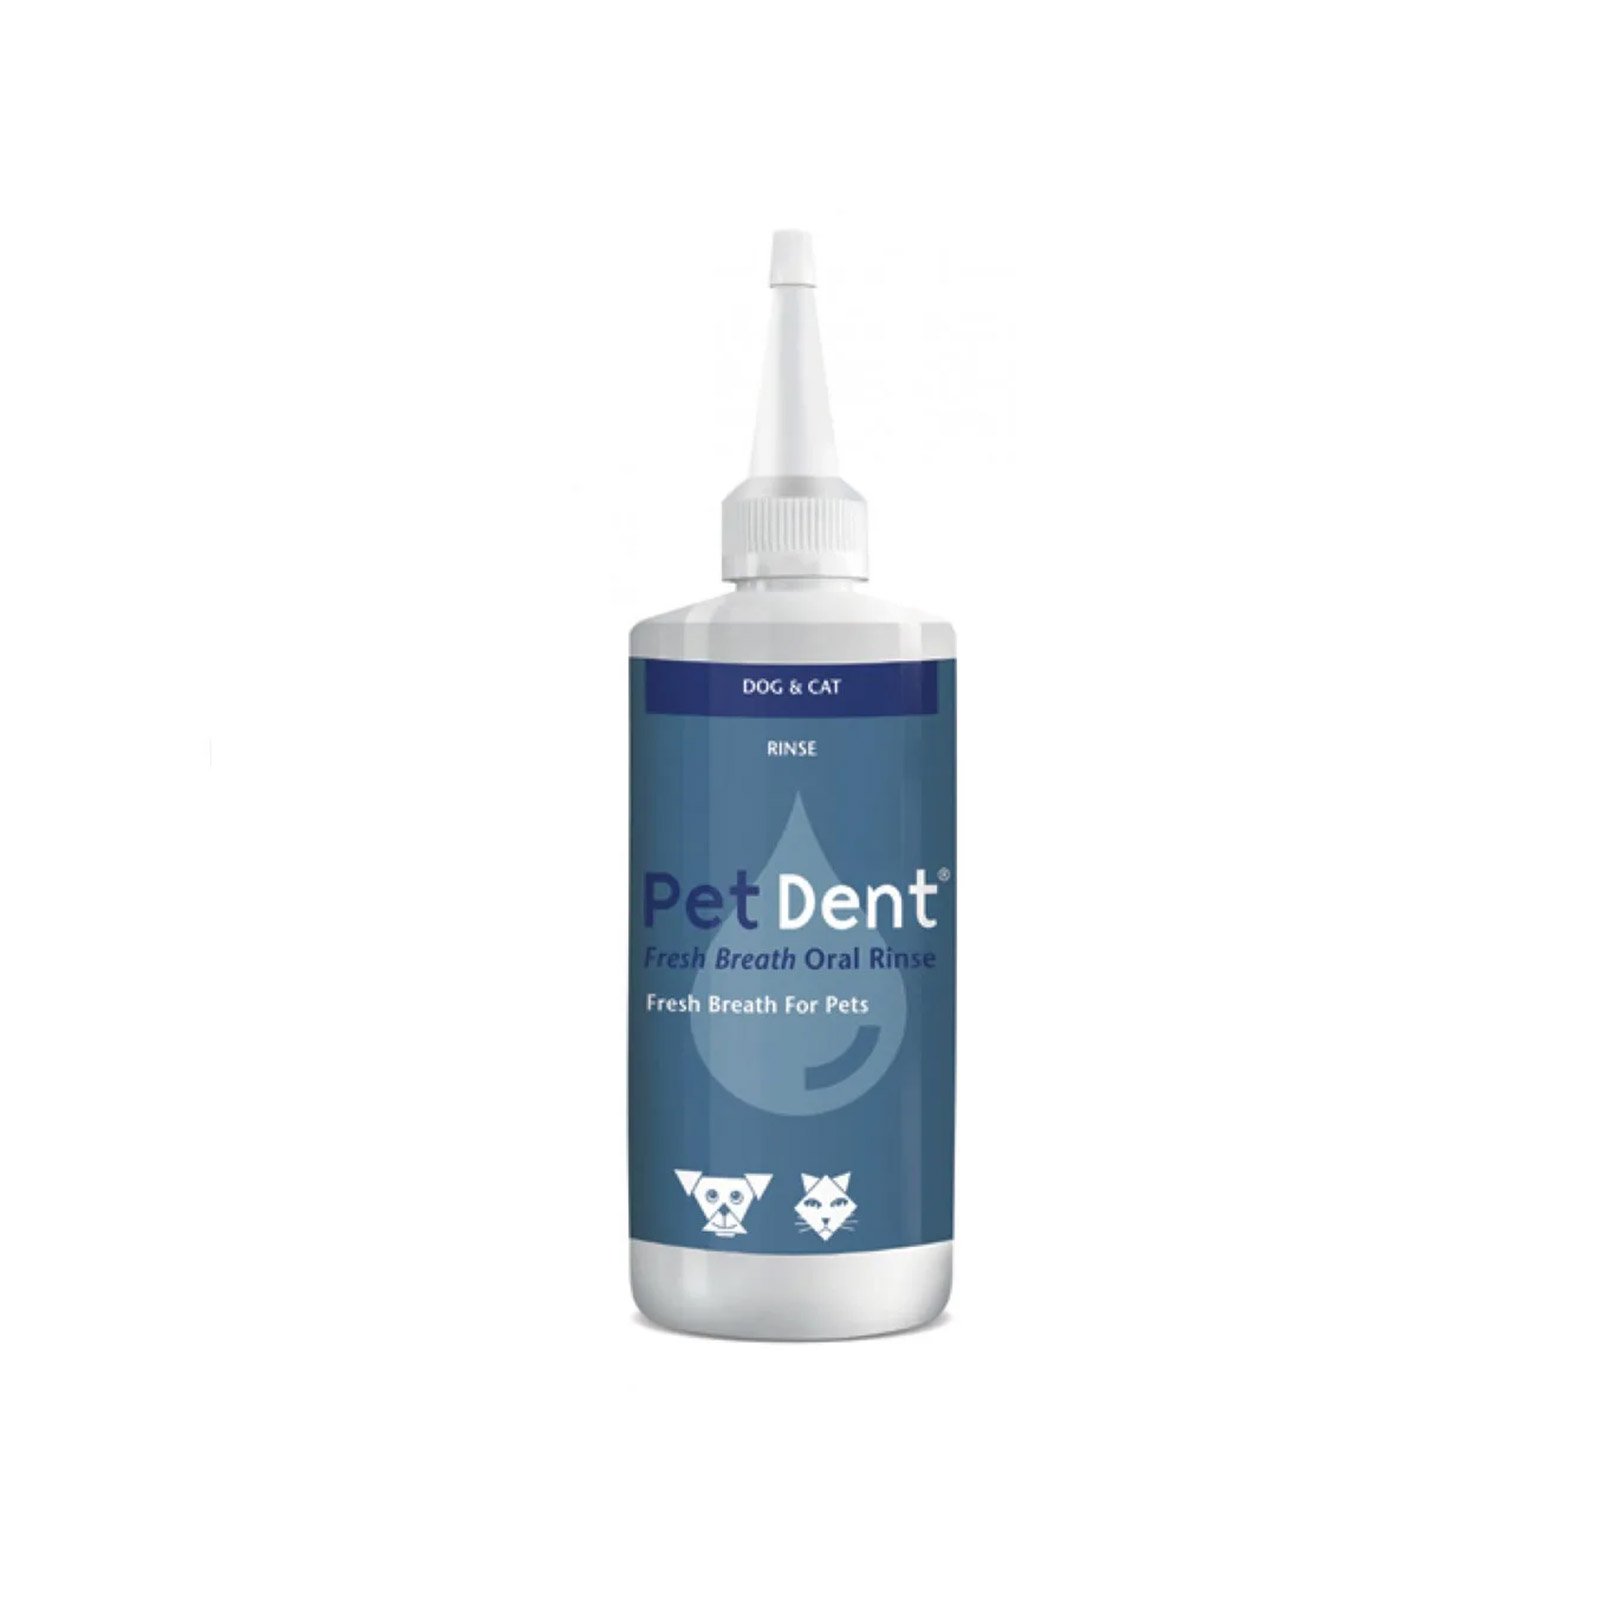 Pet Dent Oral Rinse for Dogs/Cats